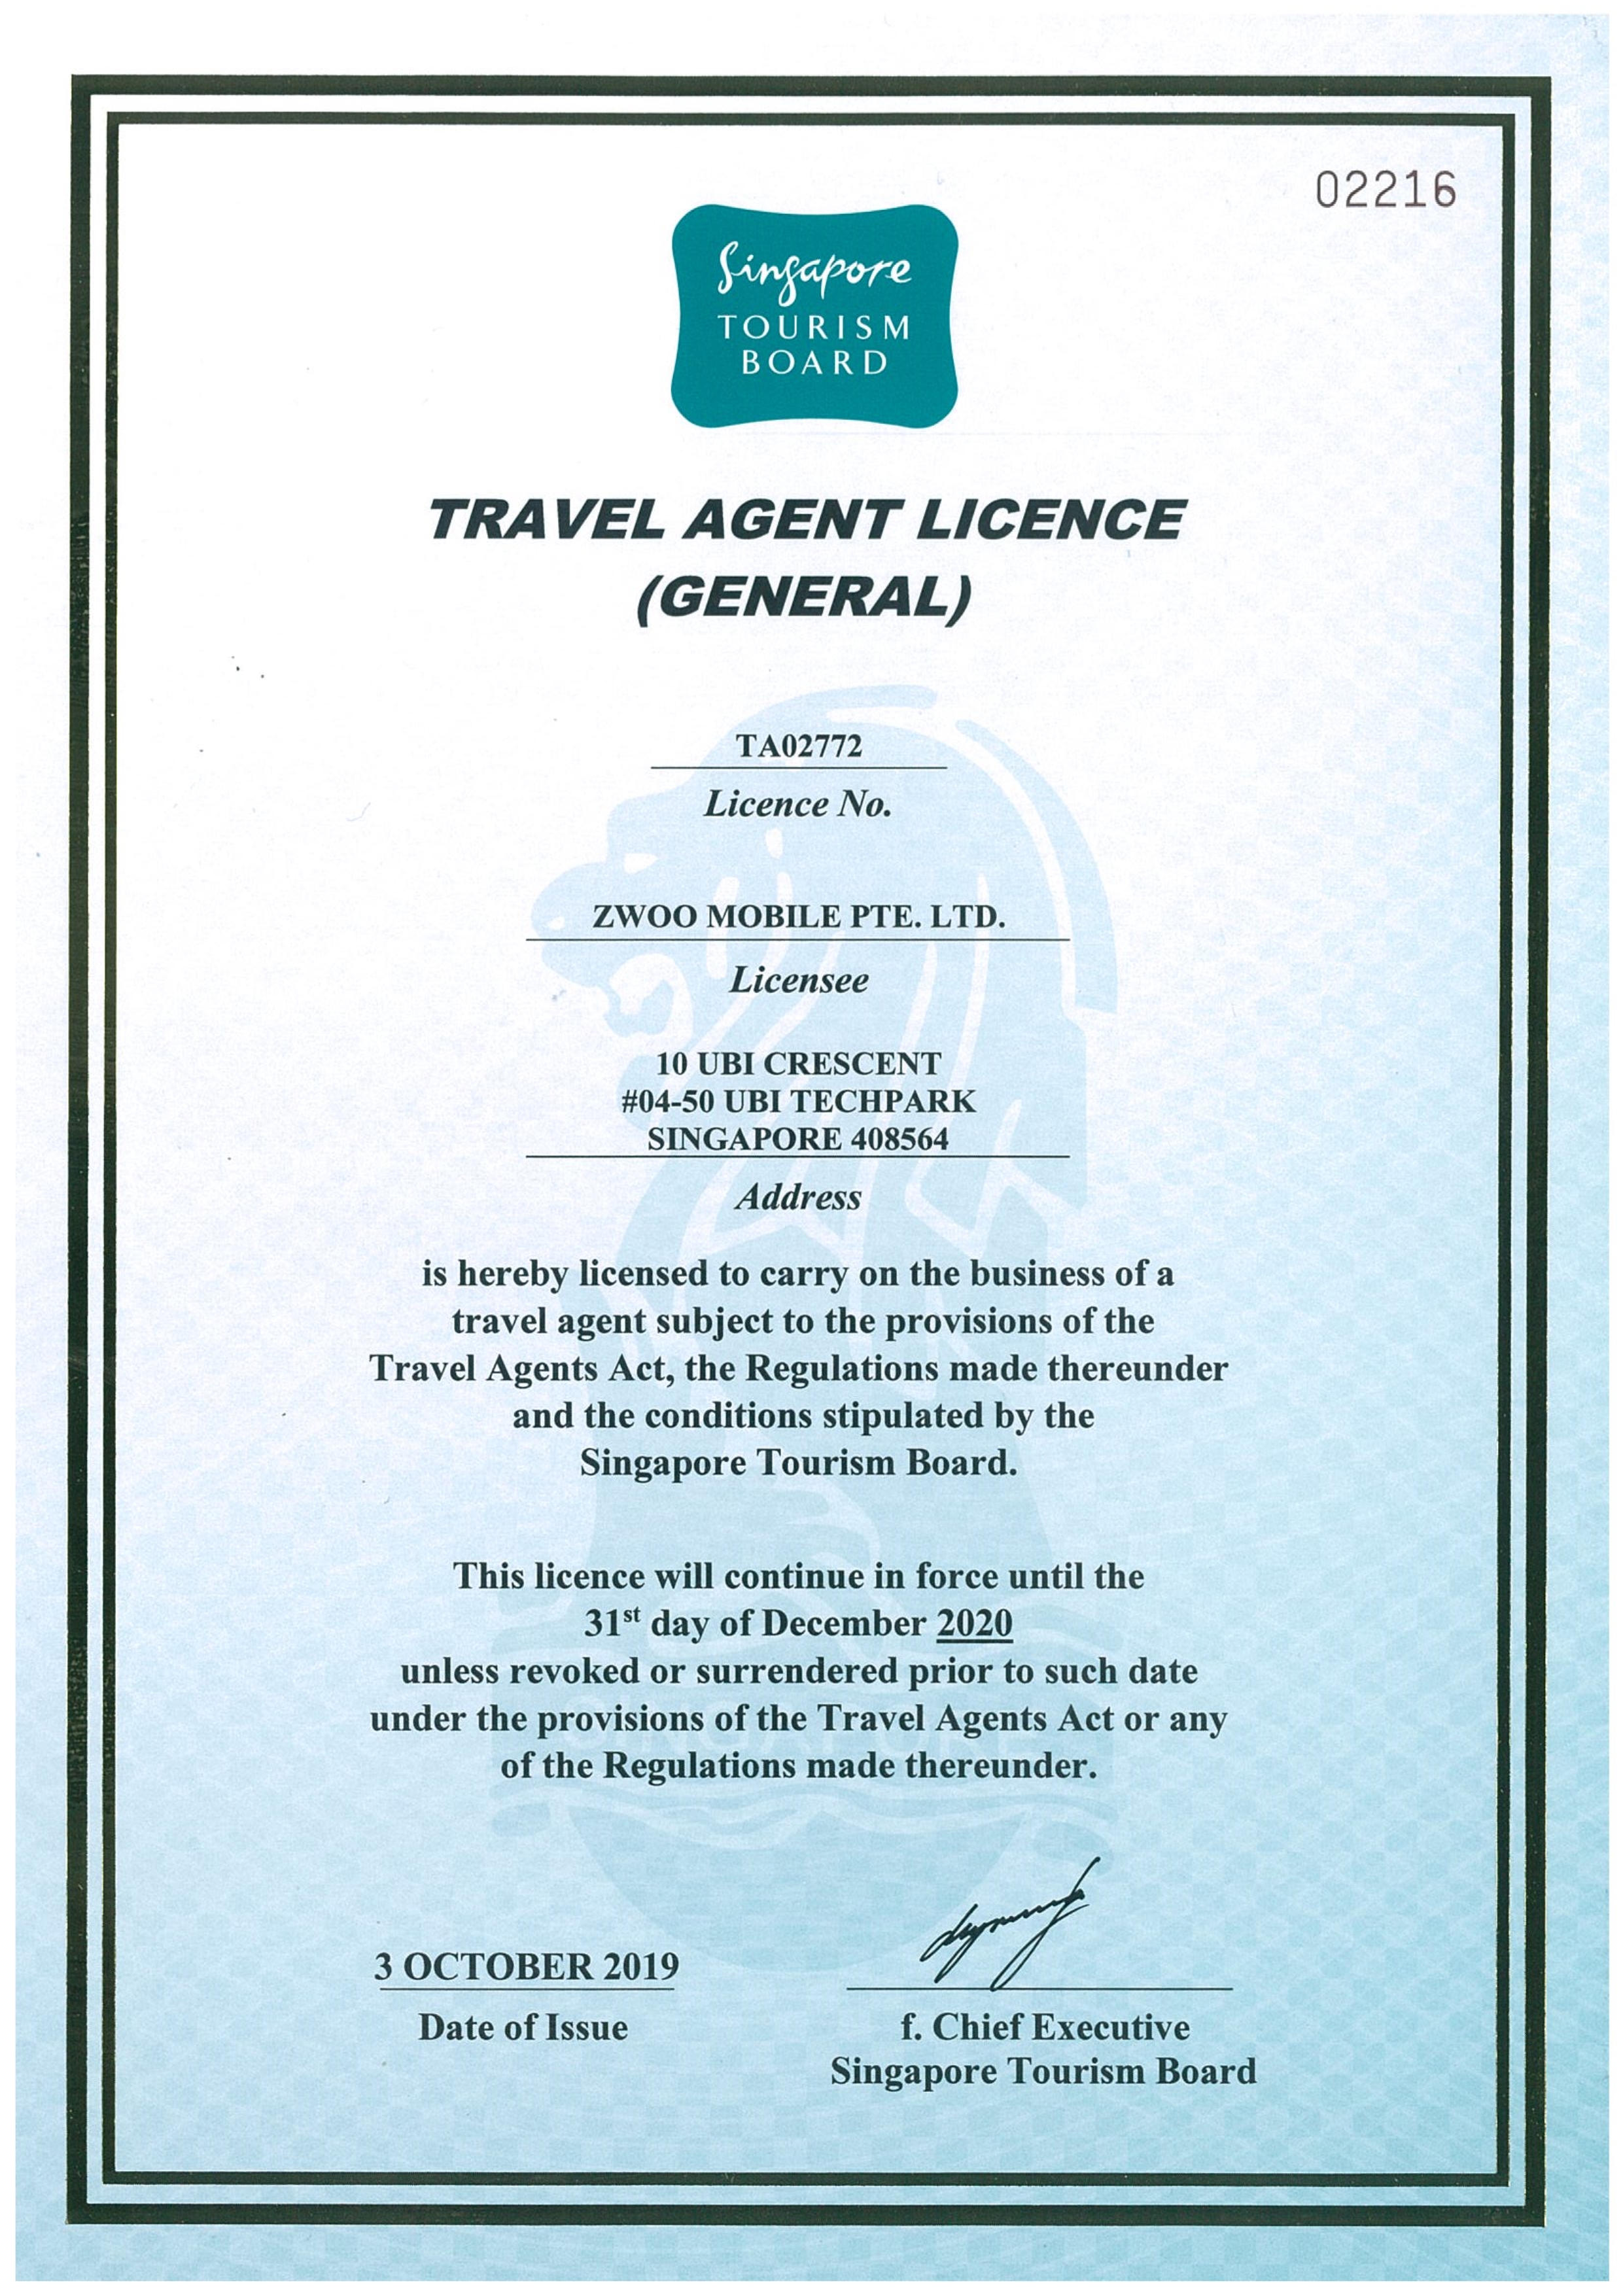 how to obtain travel agent license